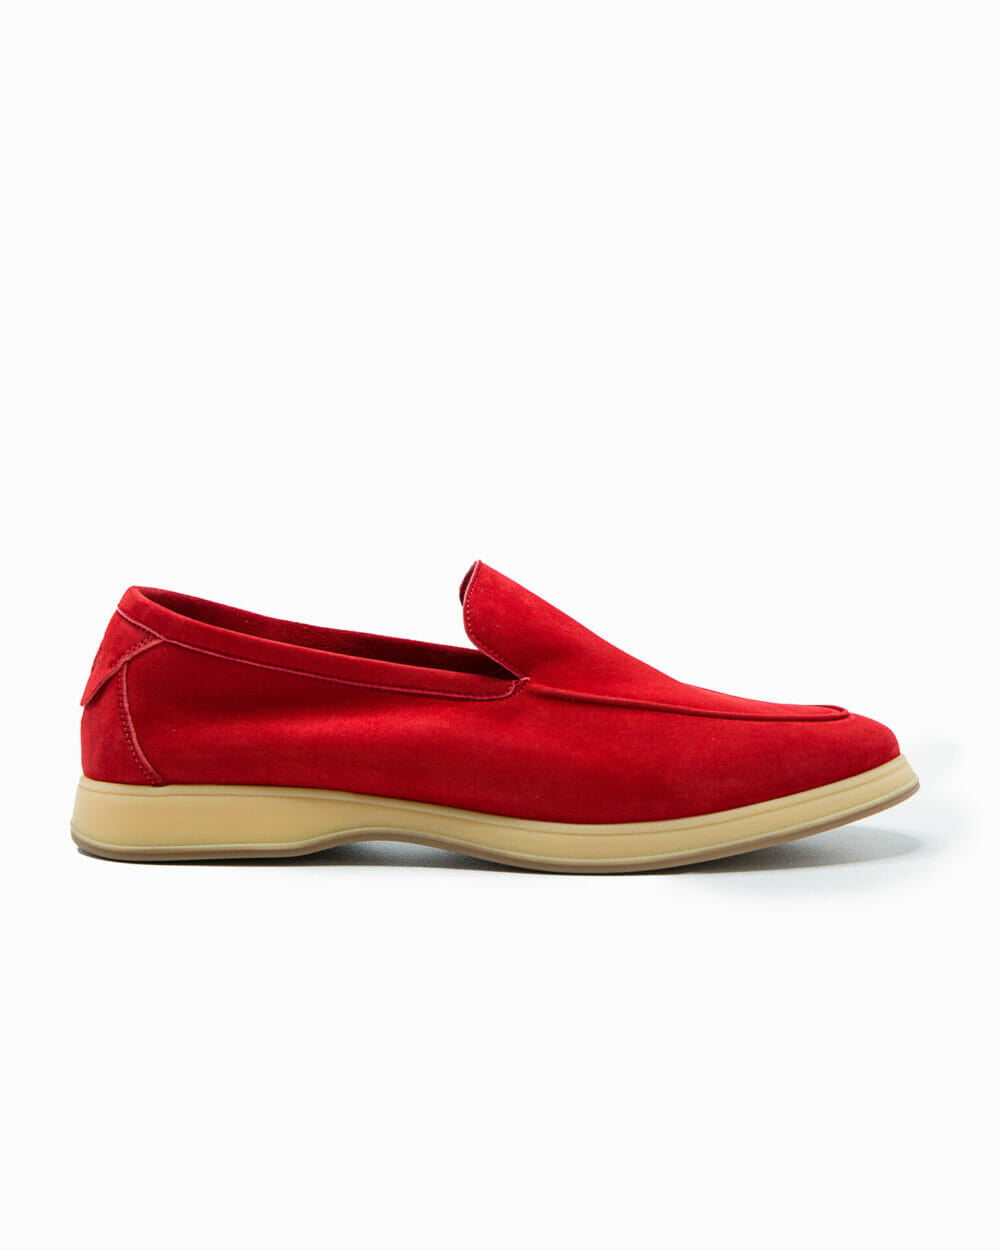 Aq-D-coast-red-suede-long-side